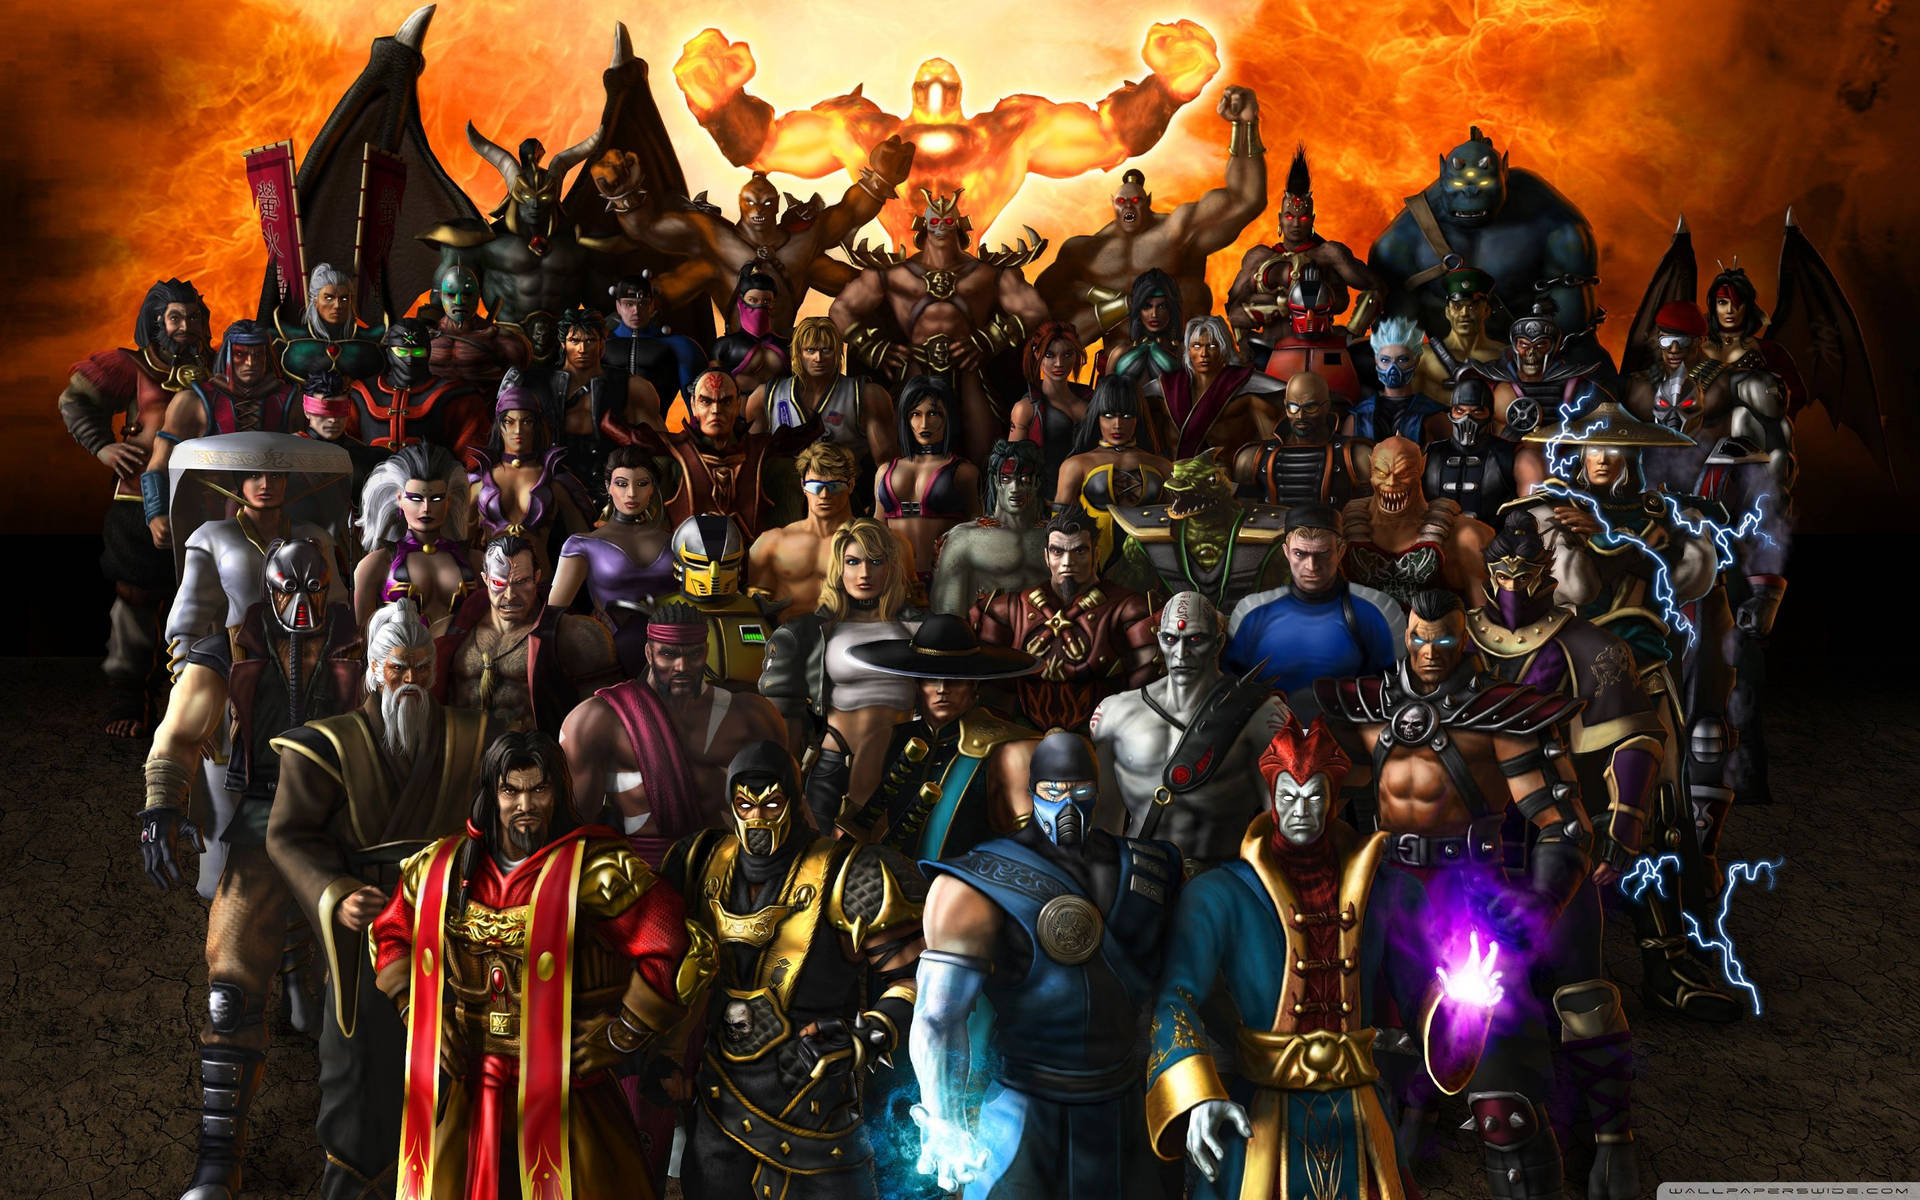 “Choose Your Fighter: Playable Characters of the blockbuster video game - Mortal Kombat” Wallpaper